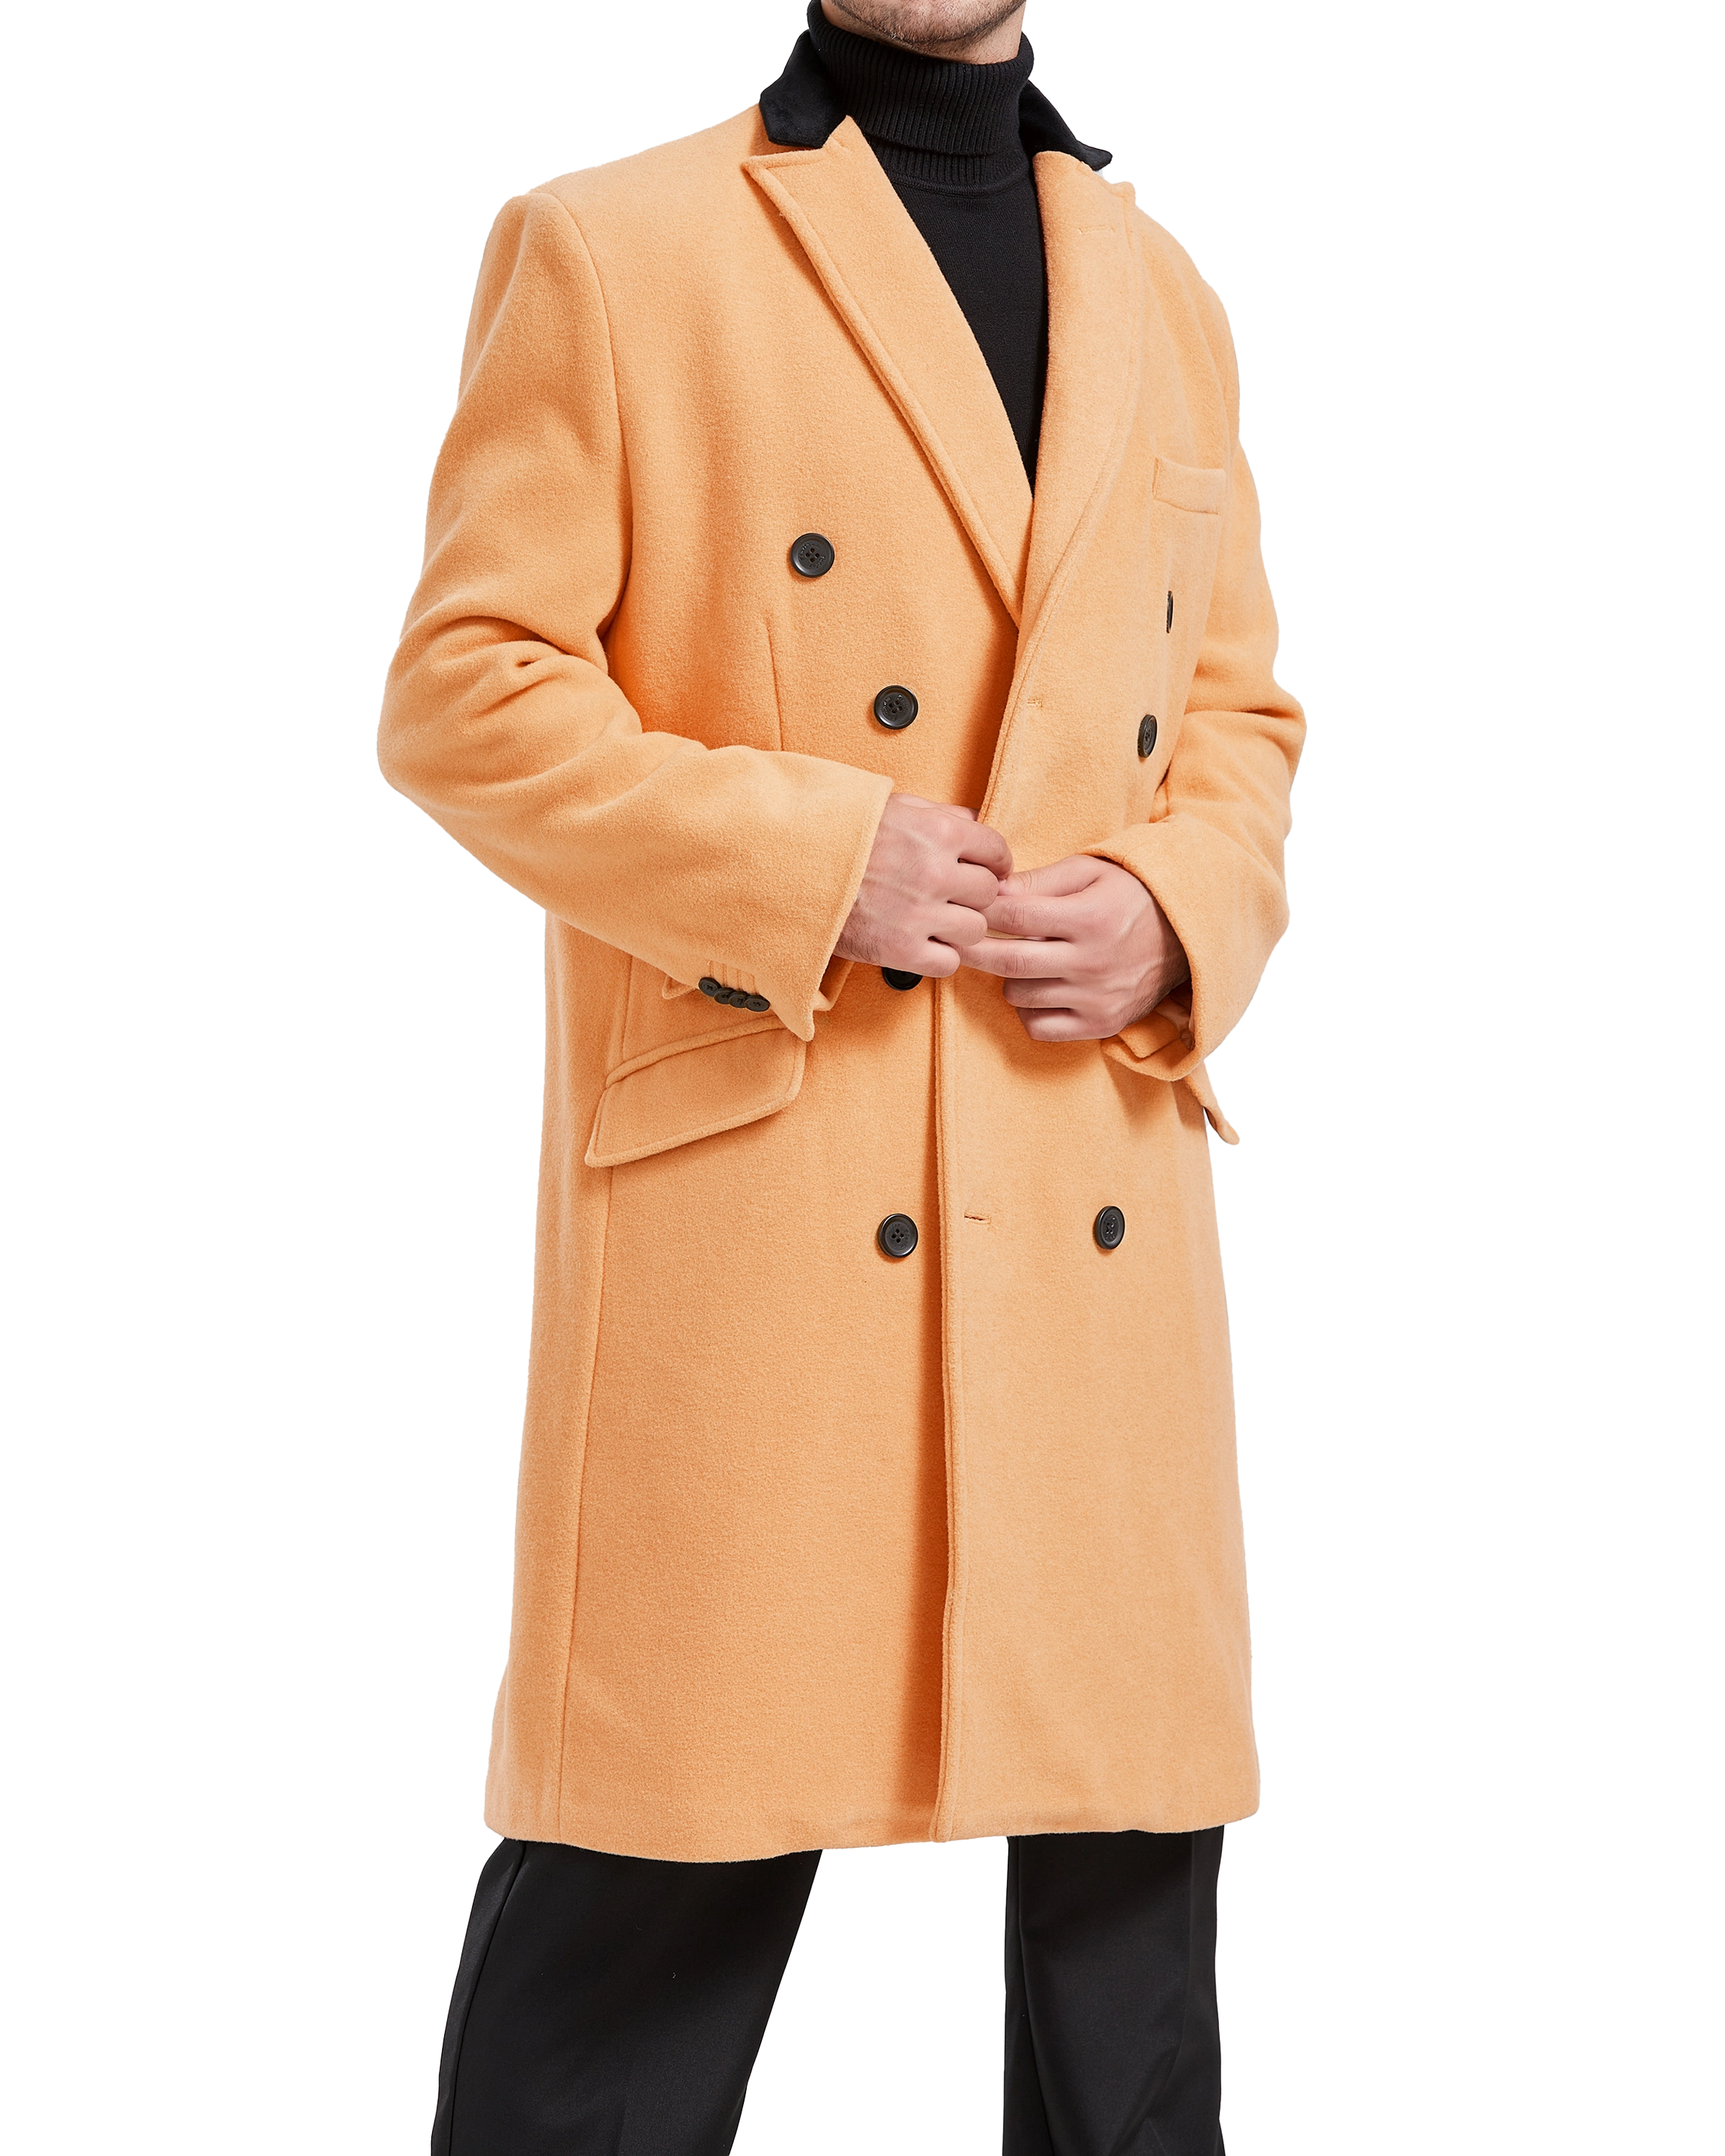 15 Camel Coats That Prove the Classics Never Go Out of Style | Esquire  fashion, Masculine fashion, Suit fashion